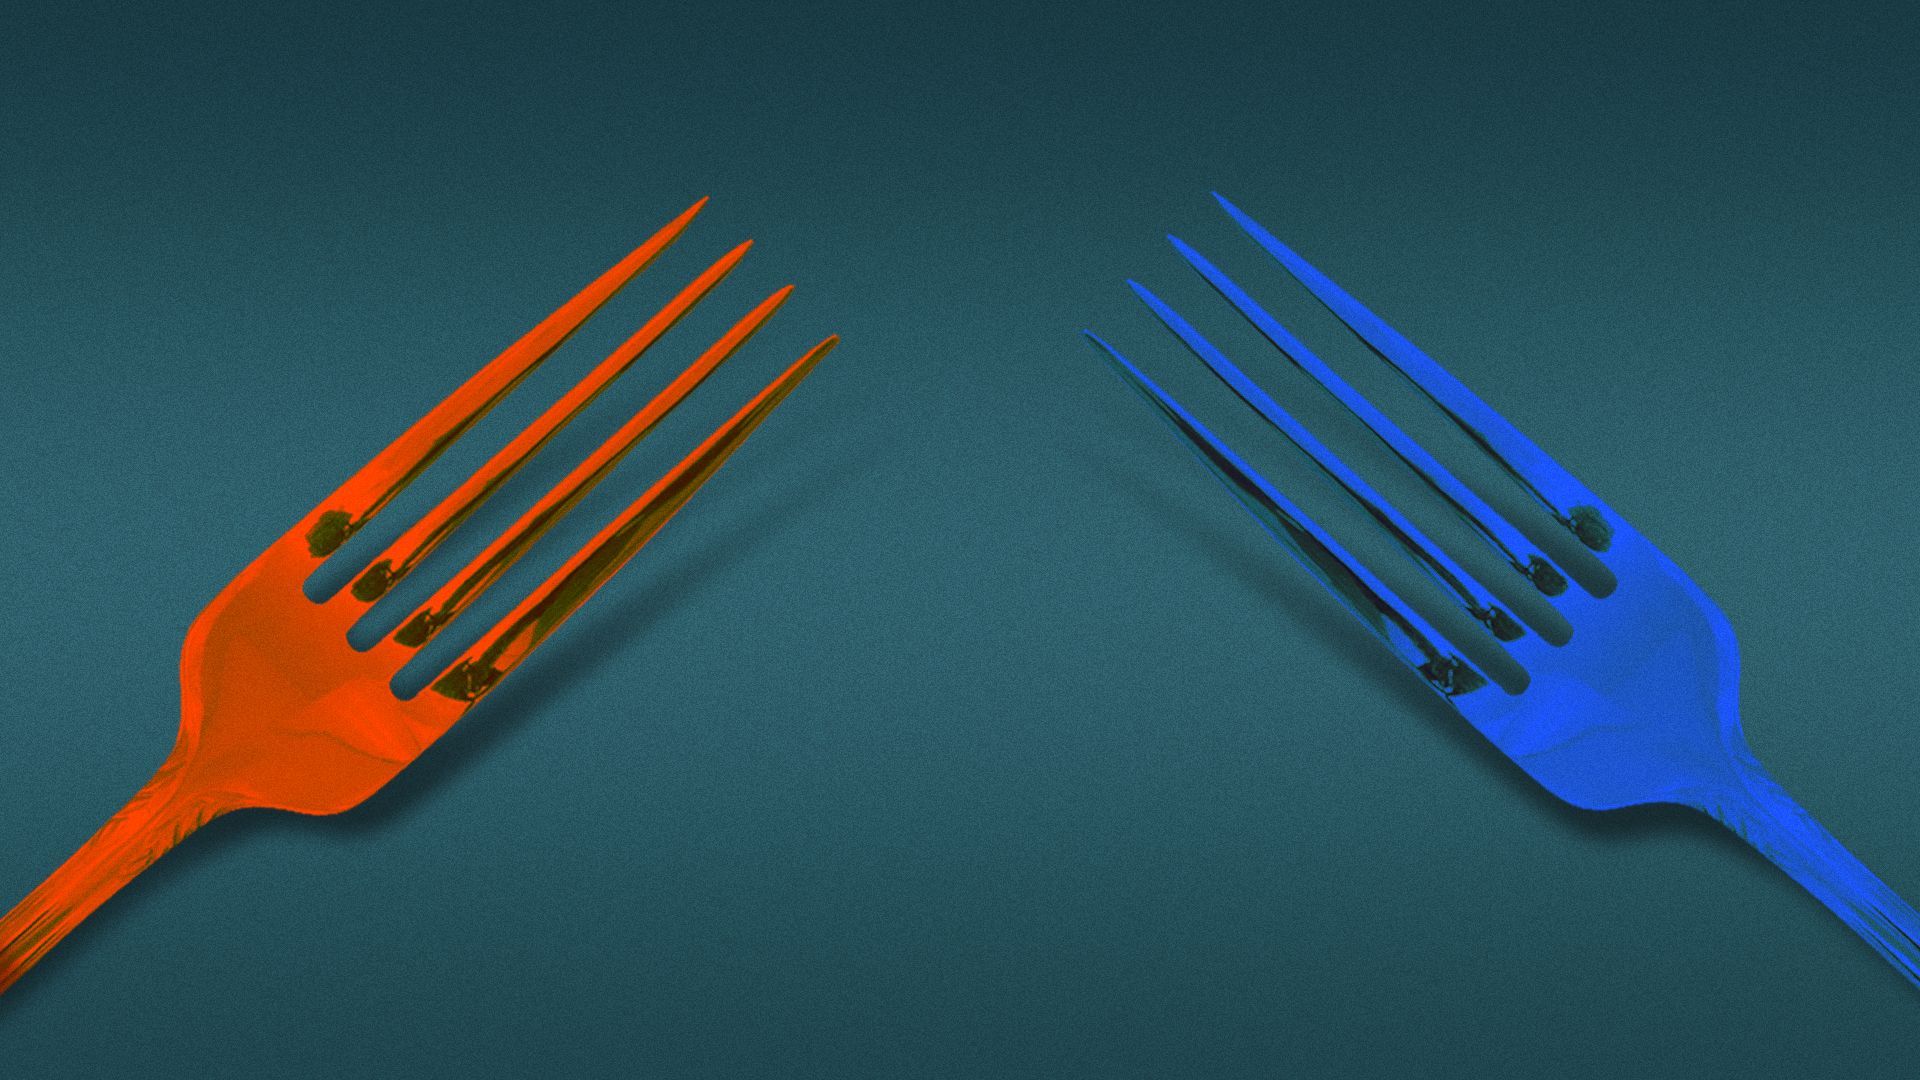 Illustration of a red and blue fork pointed at each other.